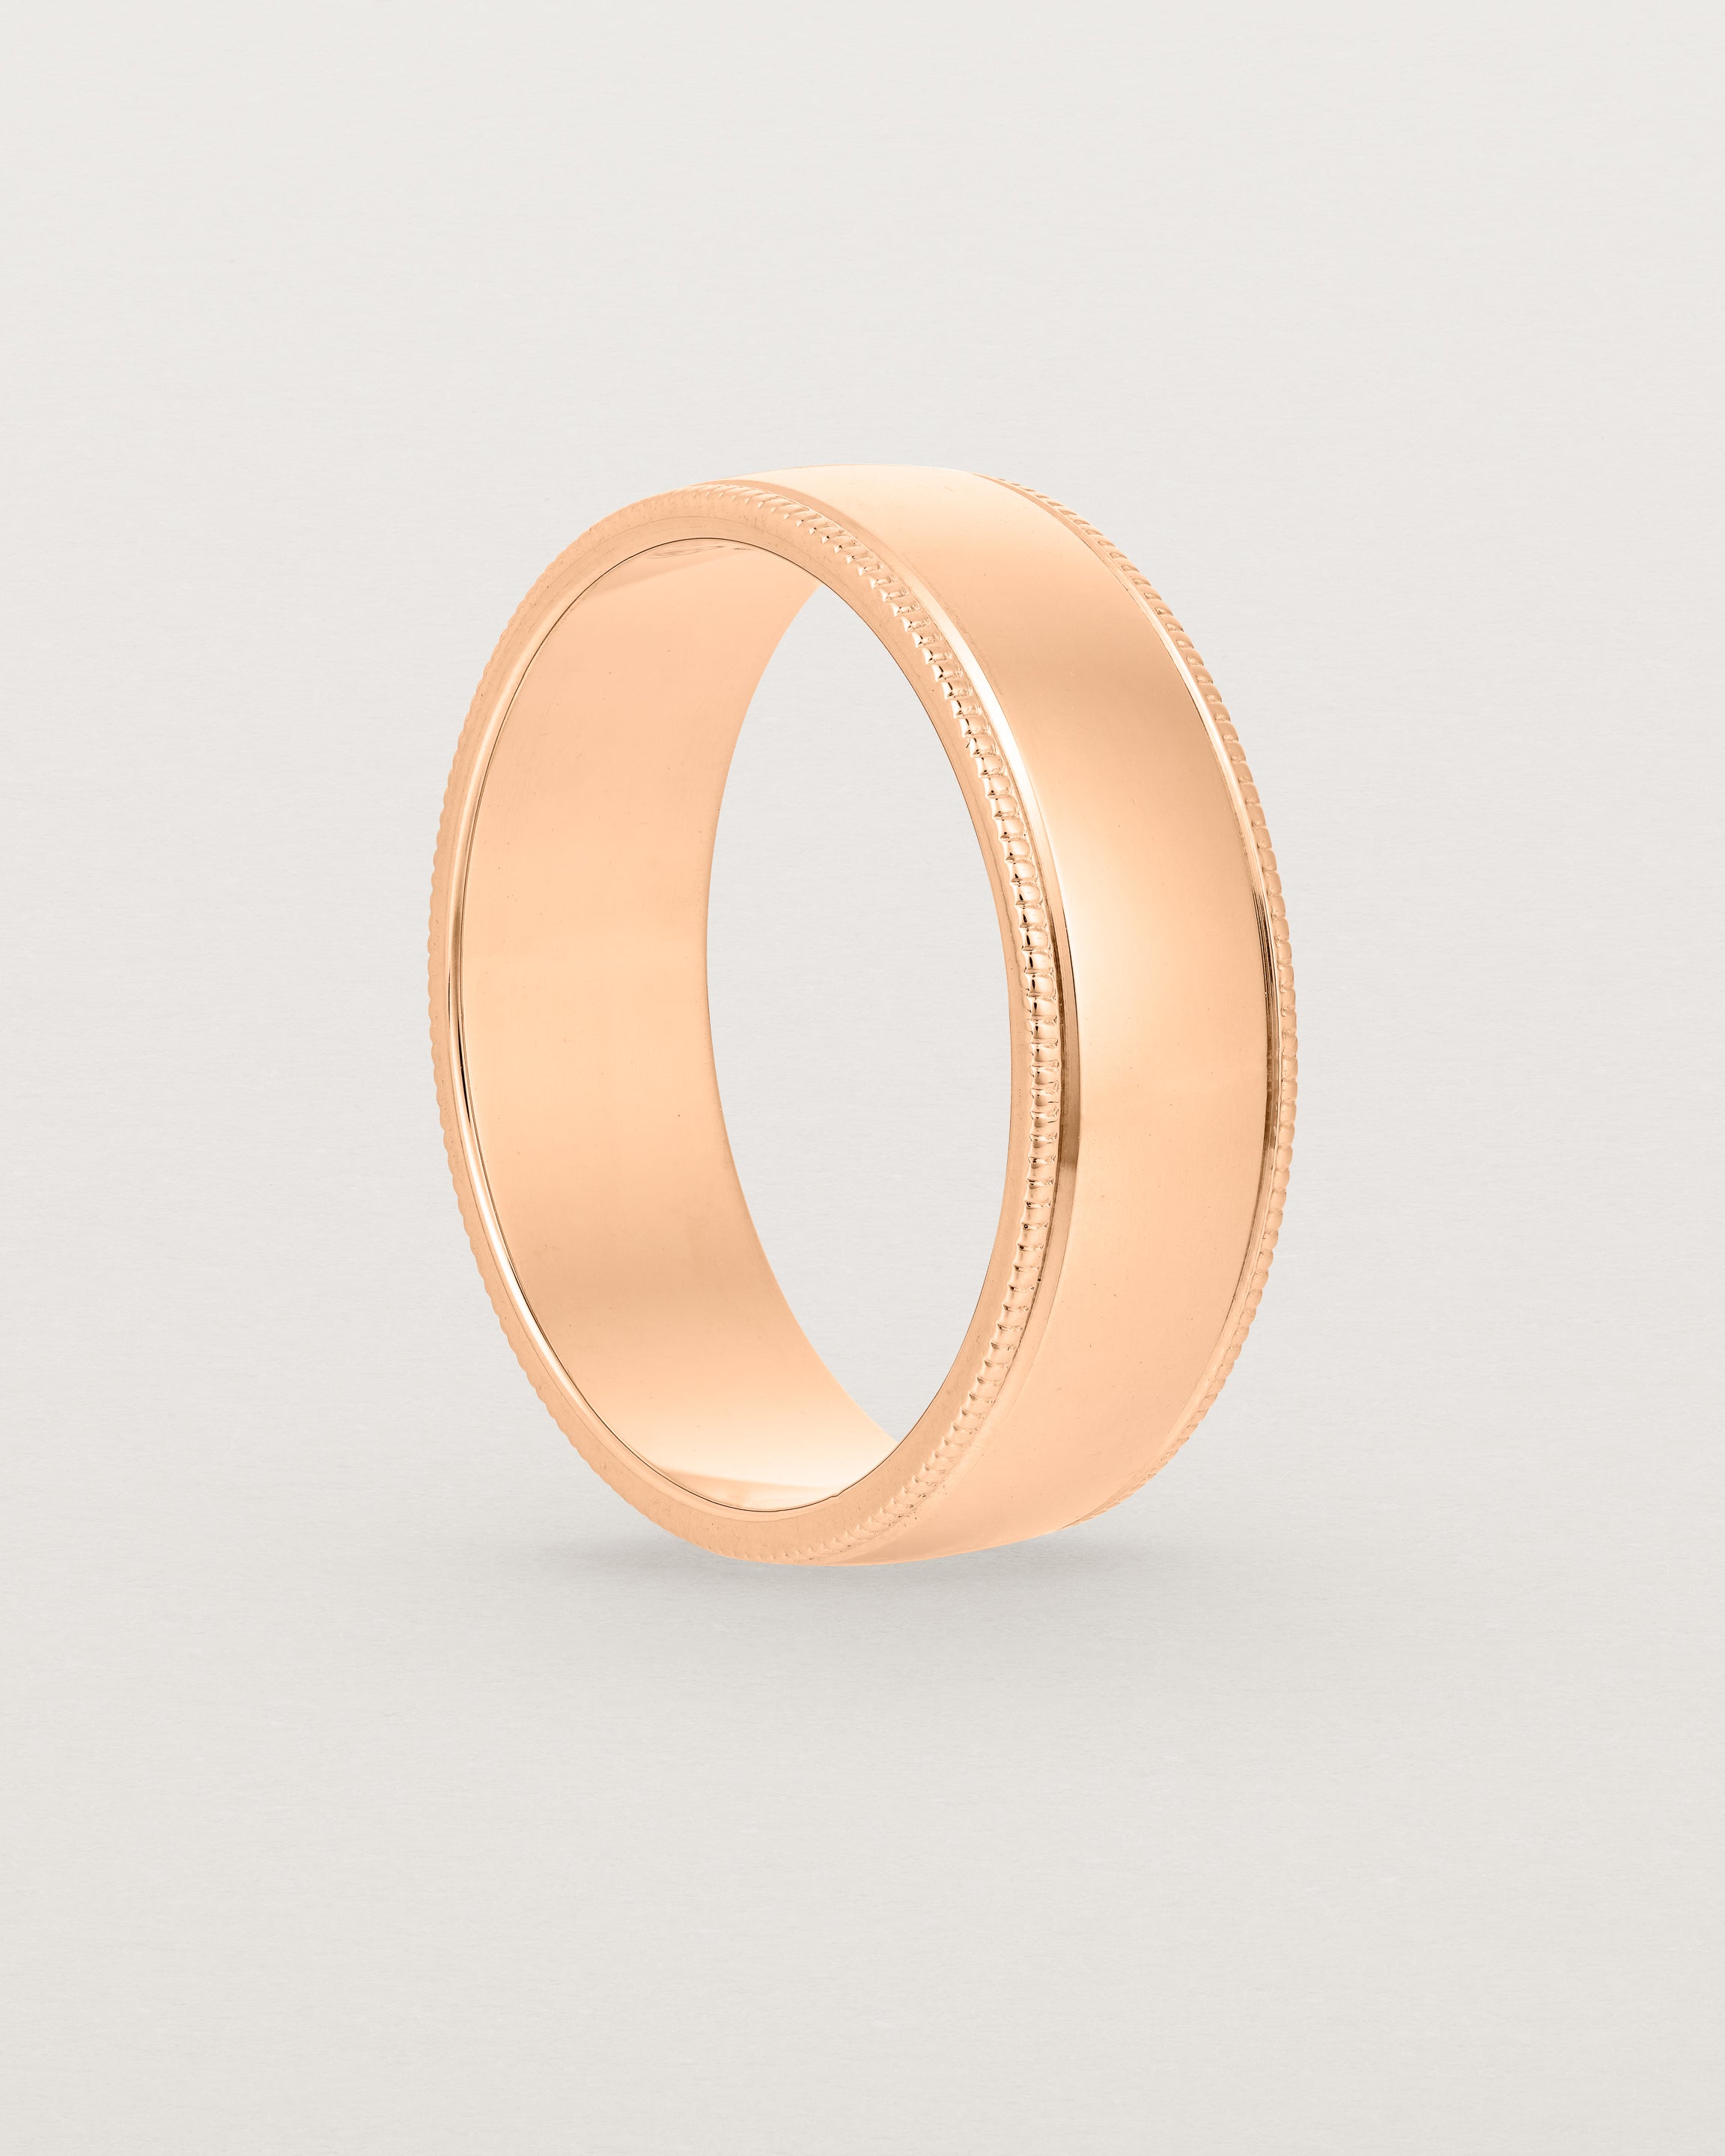 Standing view of the Millgrain Wedding Ring | 6mm in Rose Gold.